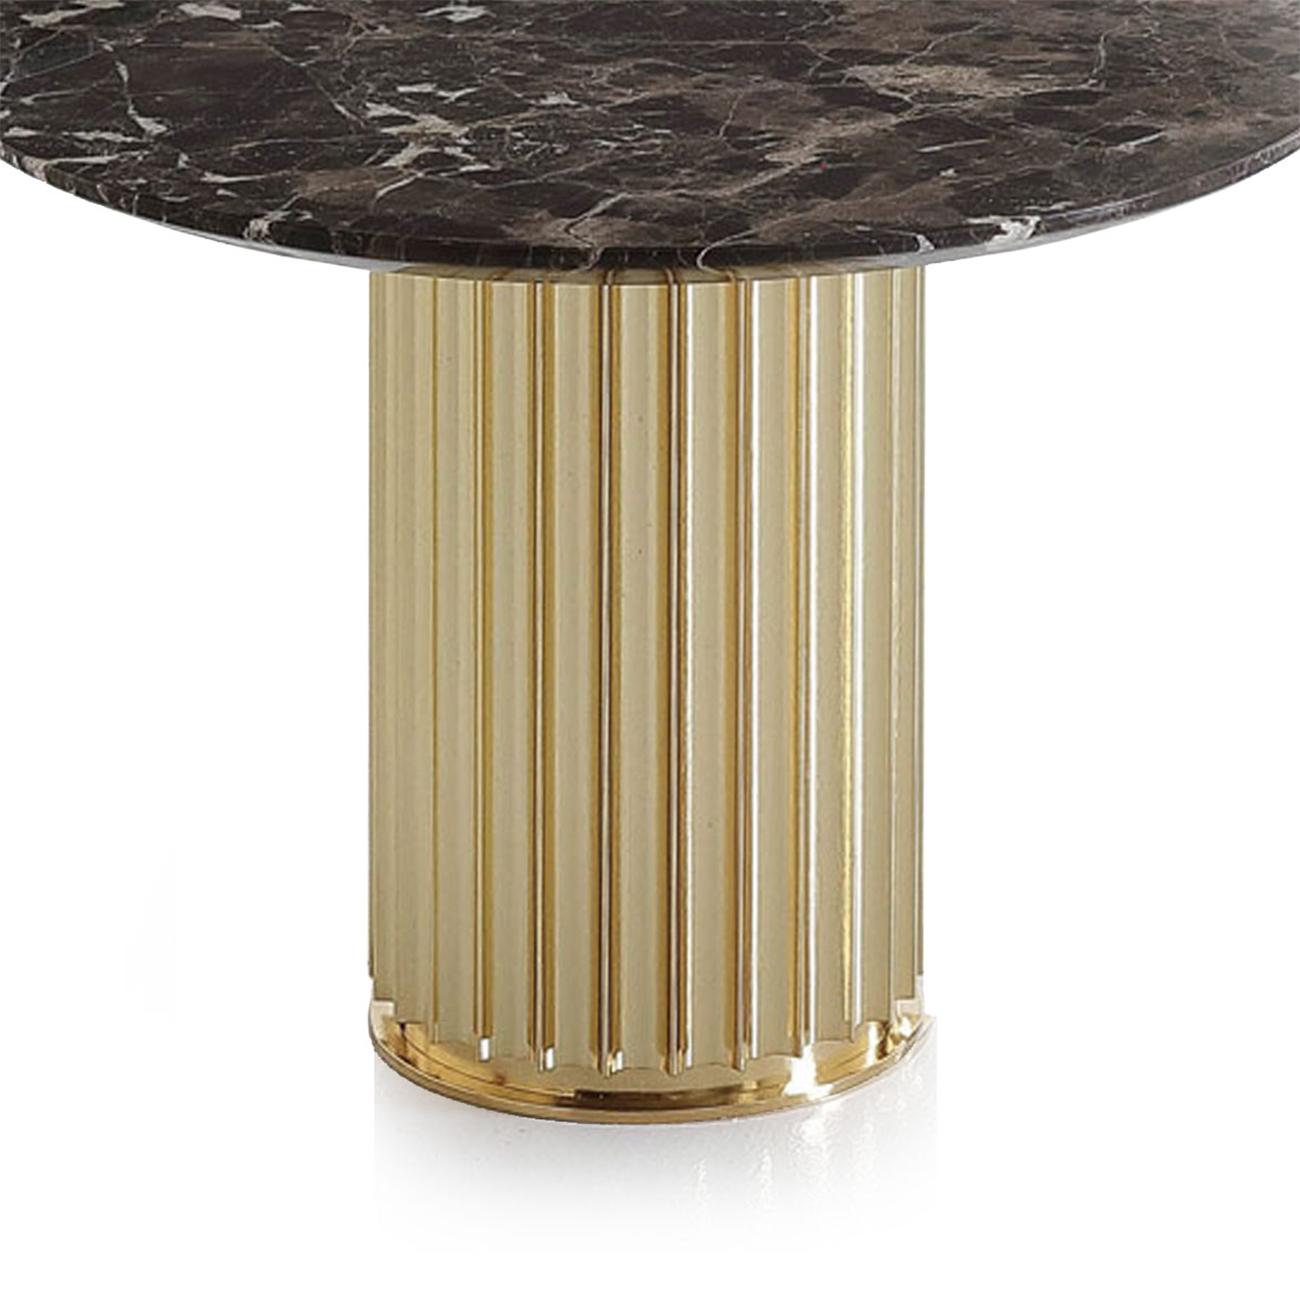 Side table colisee gold emperador with glossy
gold base with emperador marble round top in 
diameter 50cm x height 38cm, price: 3650,00€. 
Also available in diameter 60cm x height 38cm, price: 3850,00€.
Also available in solid bronze base and